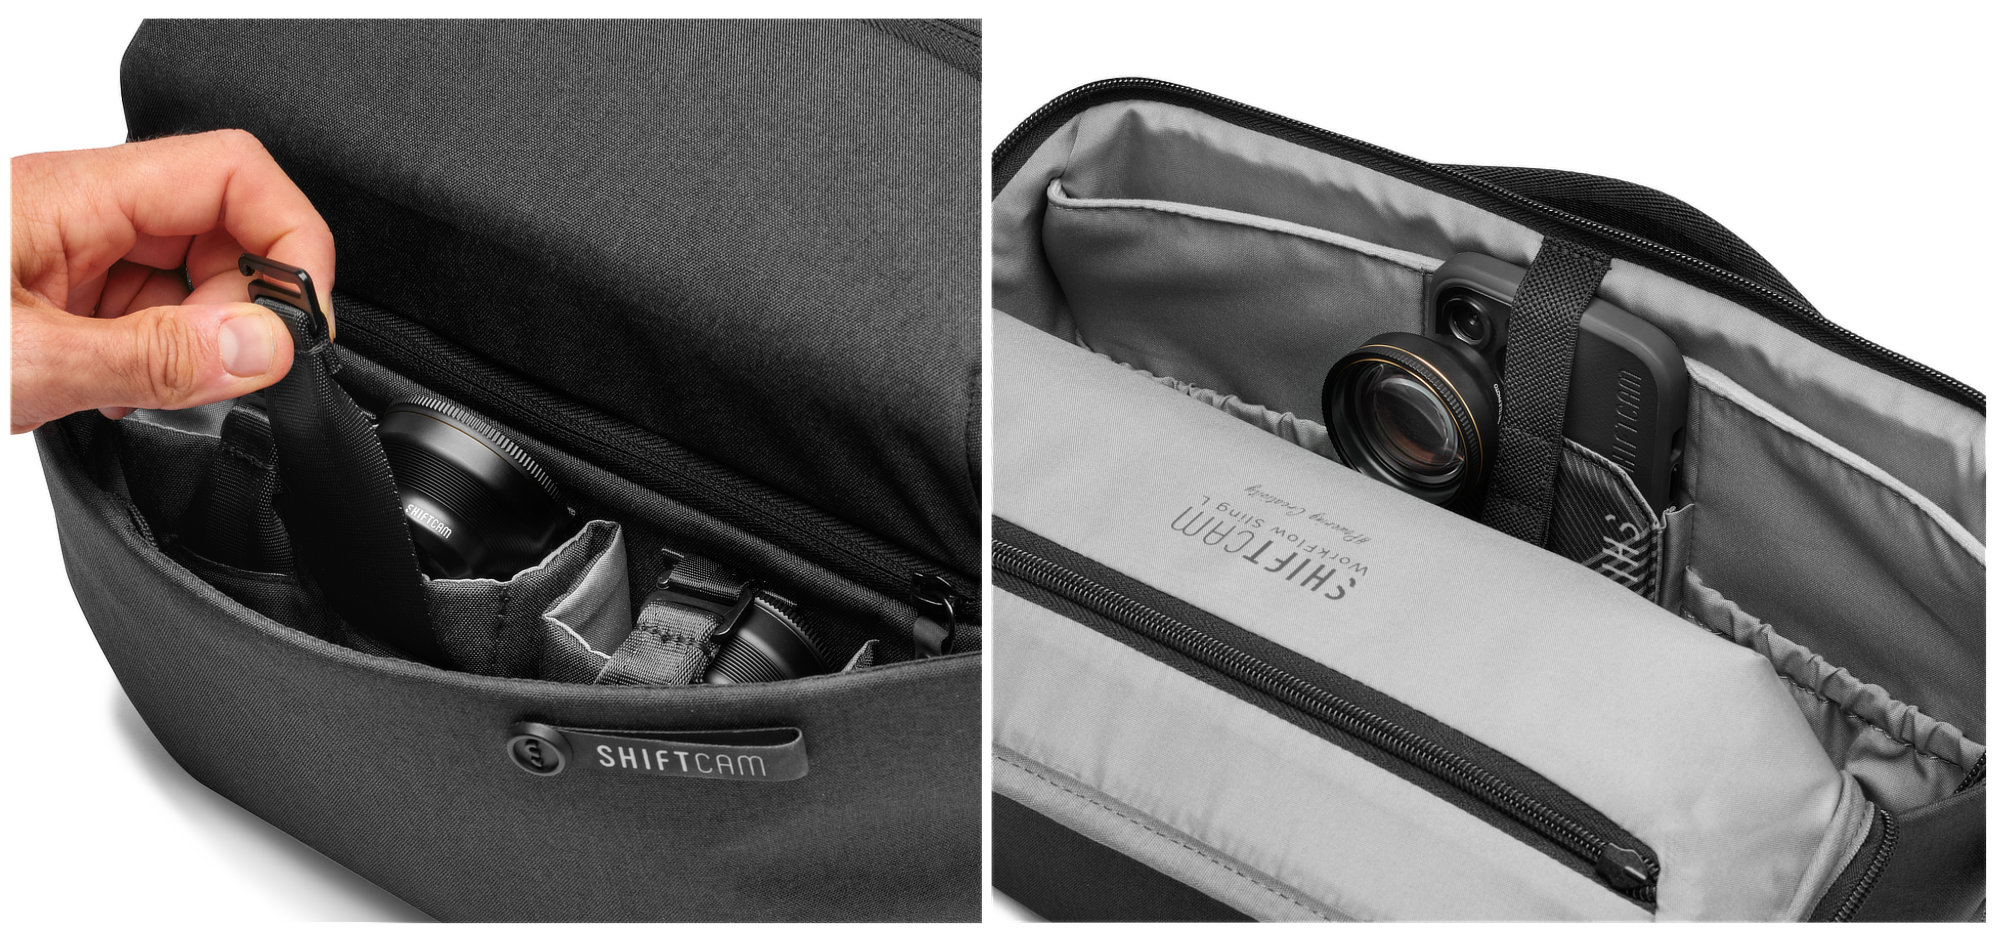 ShiftCam: the world’s first professional bag for mobile photography